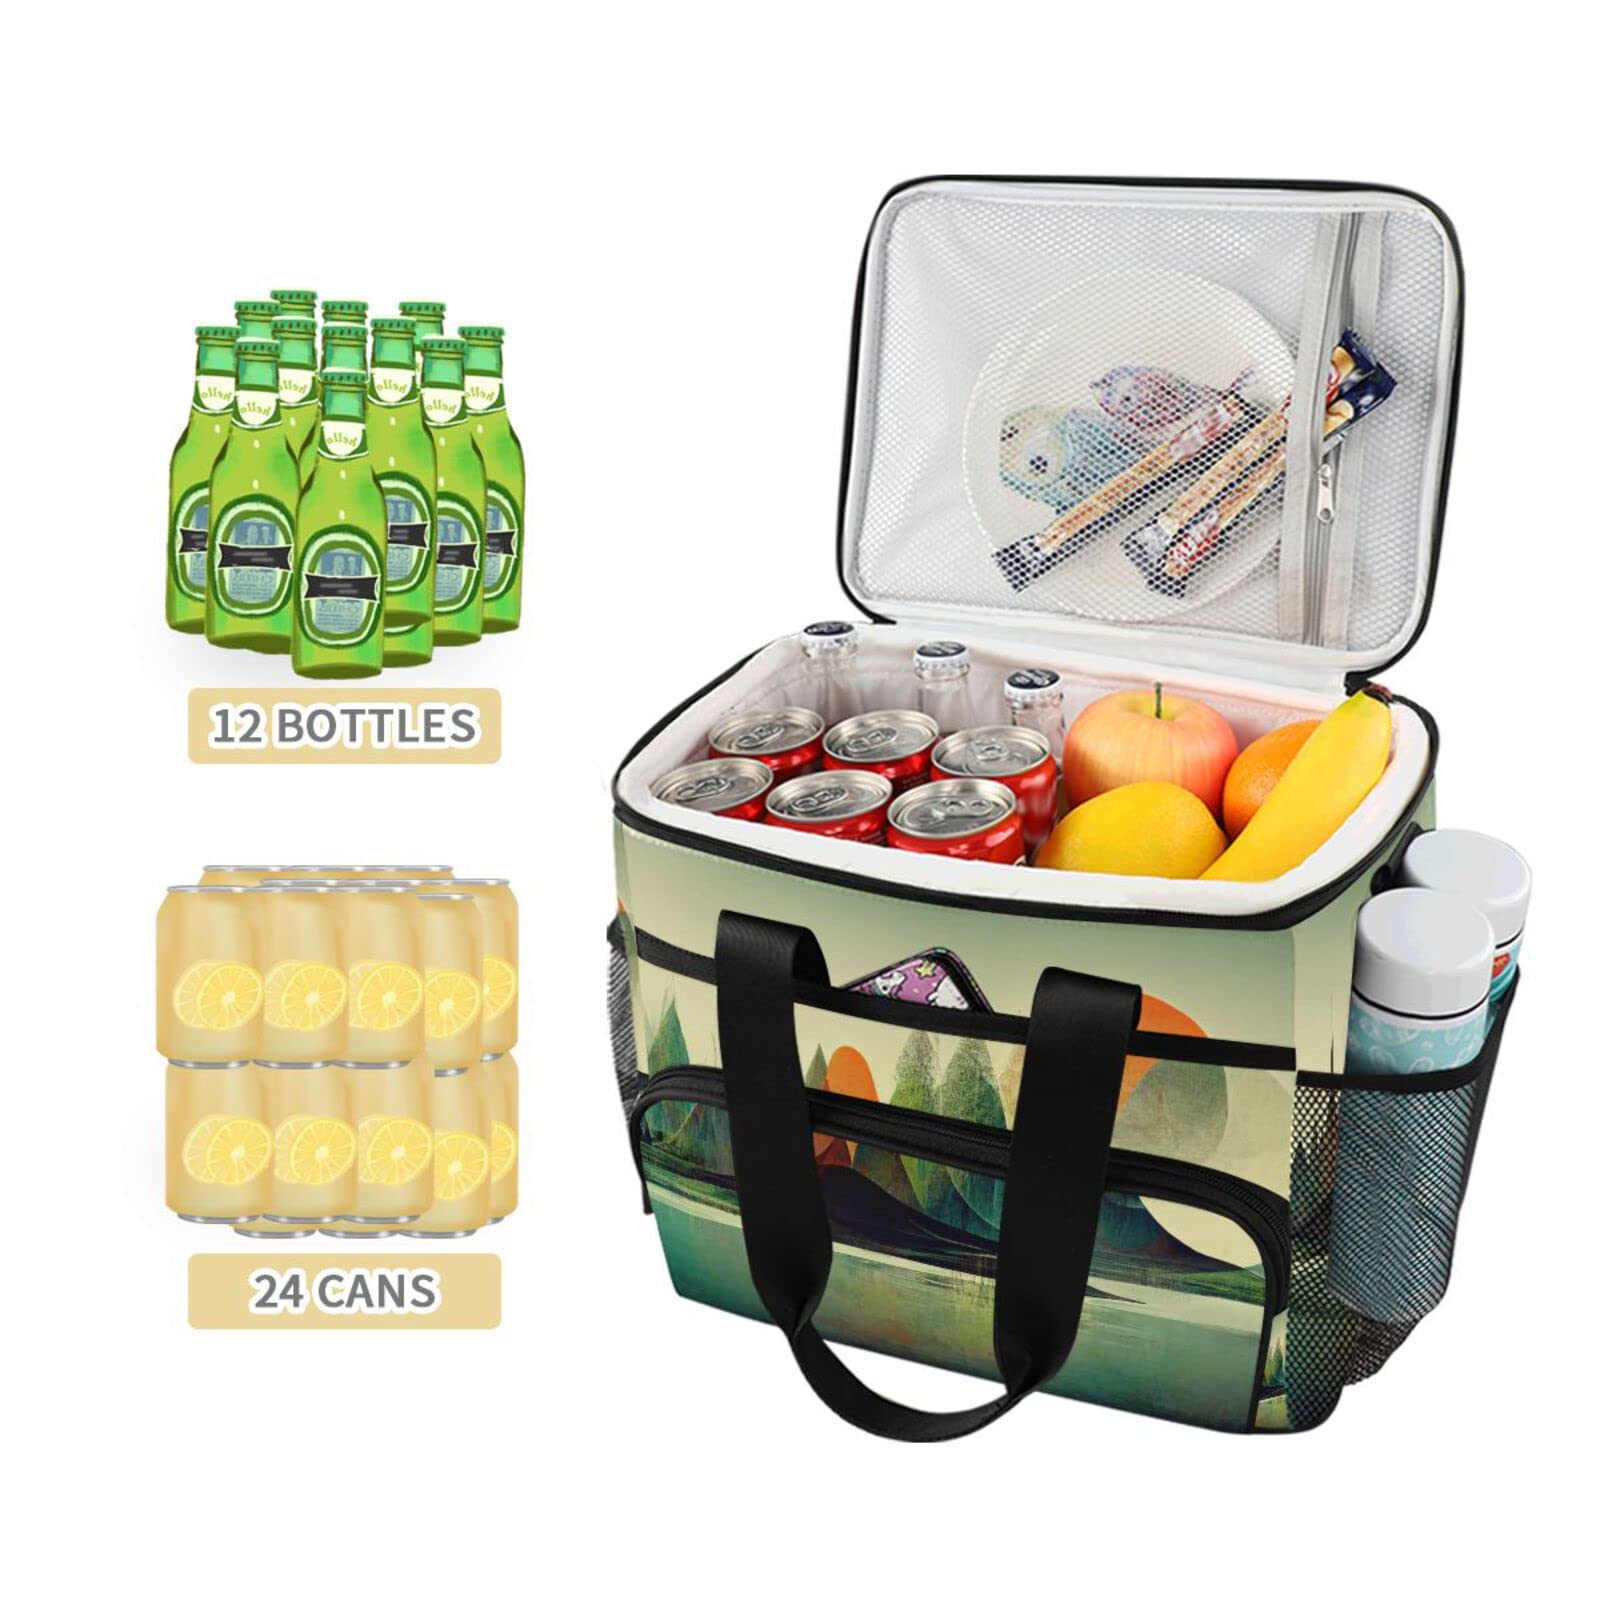 ZENWAWA Abstract Mountain Lake Cooler Bag 24 Cans Insulated Cooler Tote Bag Lunch Box Leak-Proof|Crossbody & Handheld|Keep Cool Up to 12 Hours|Aesthetic Full Print